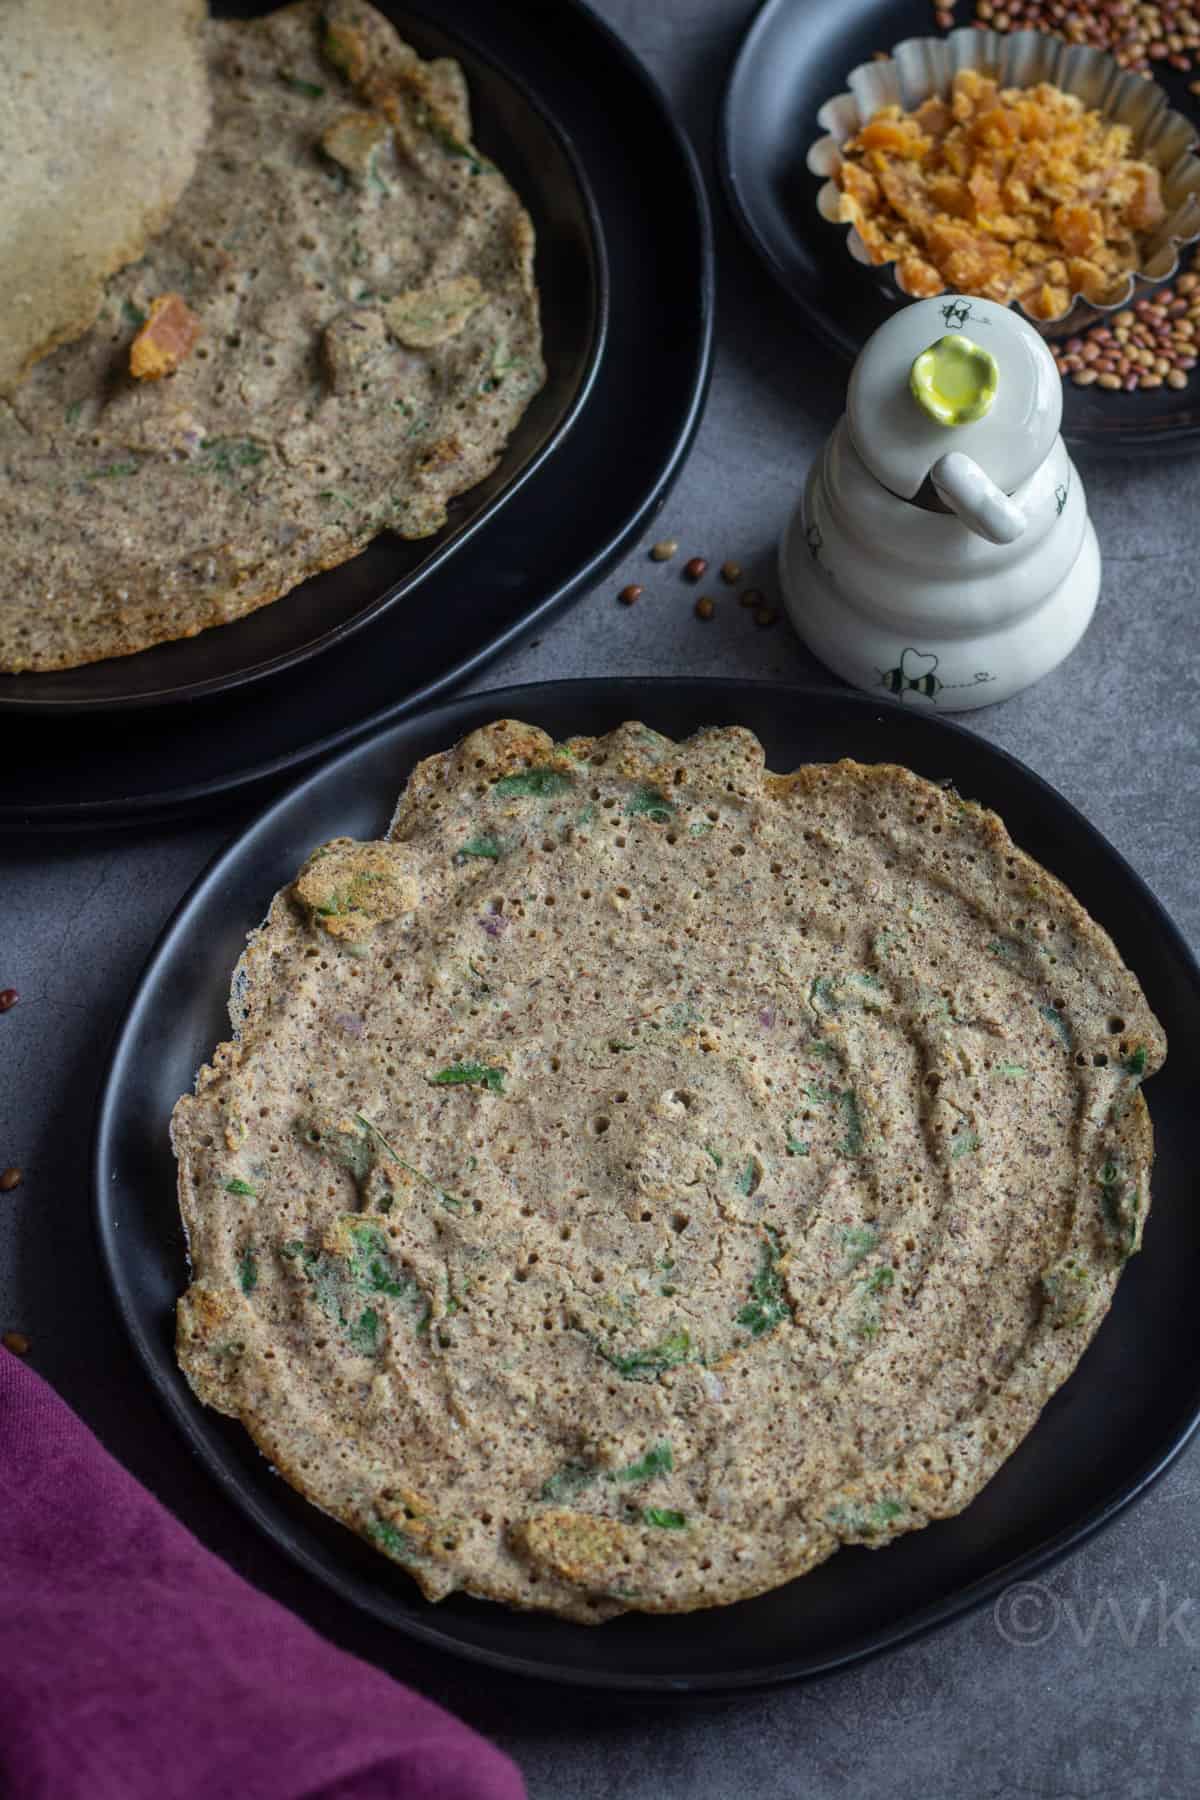 horsegram adai dosai served with jaggery and honey